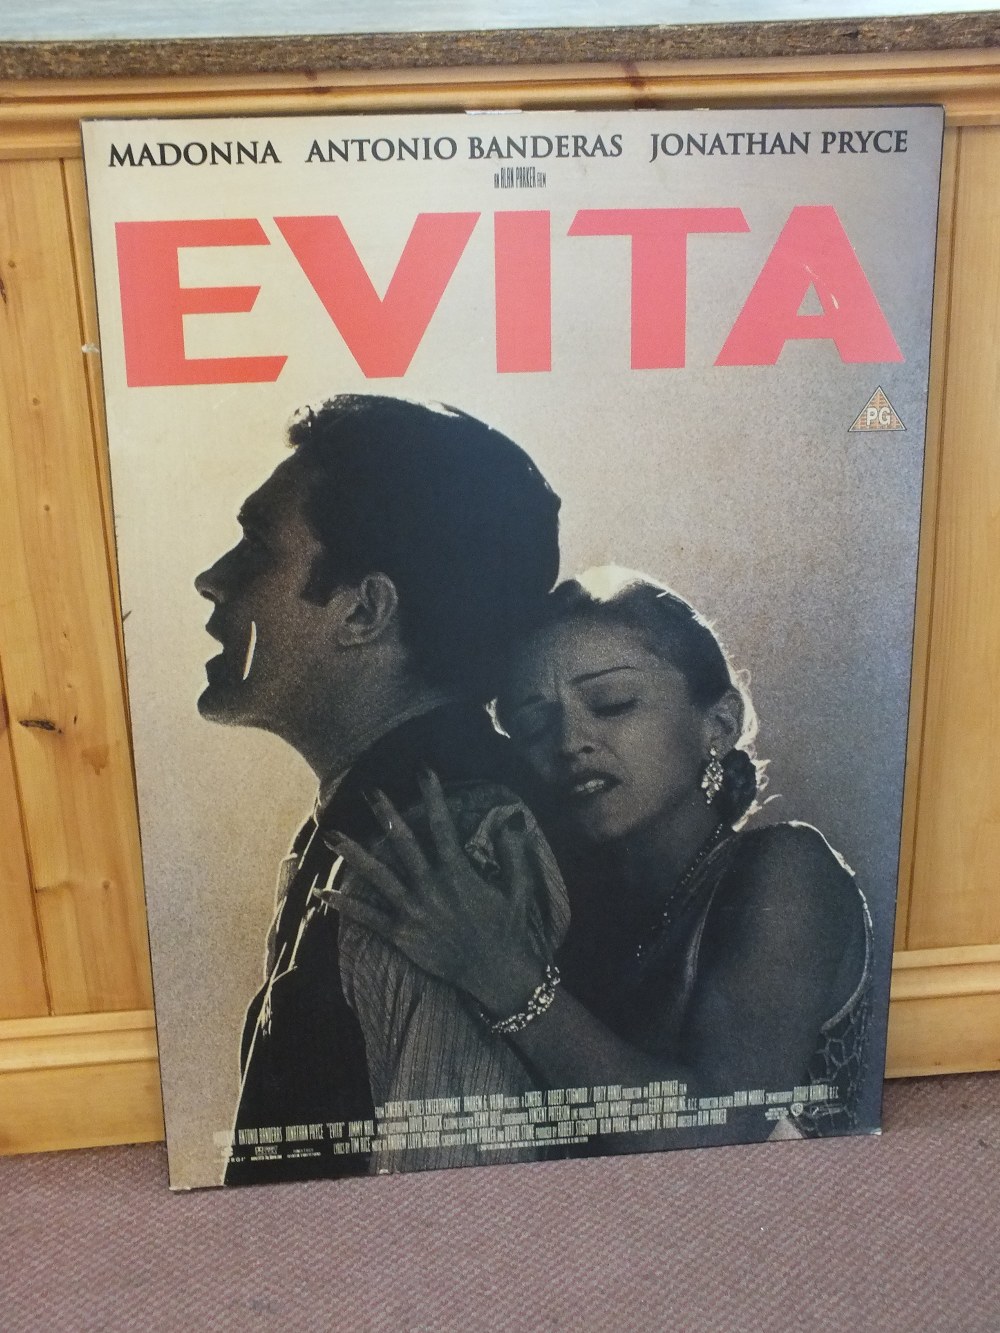 A film poster "Evita" mounted on board